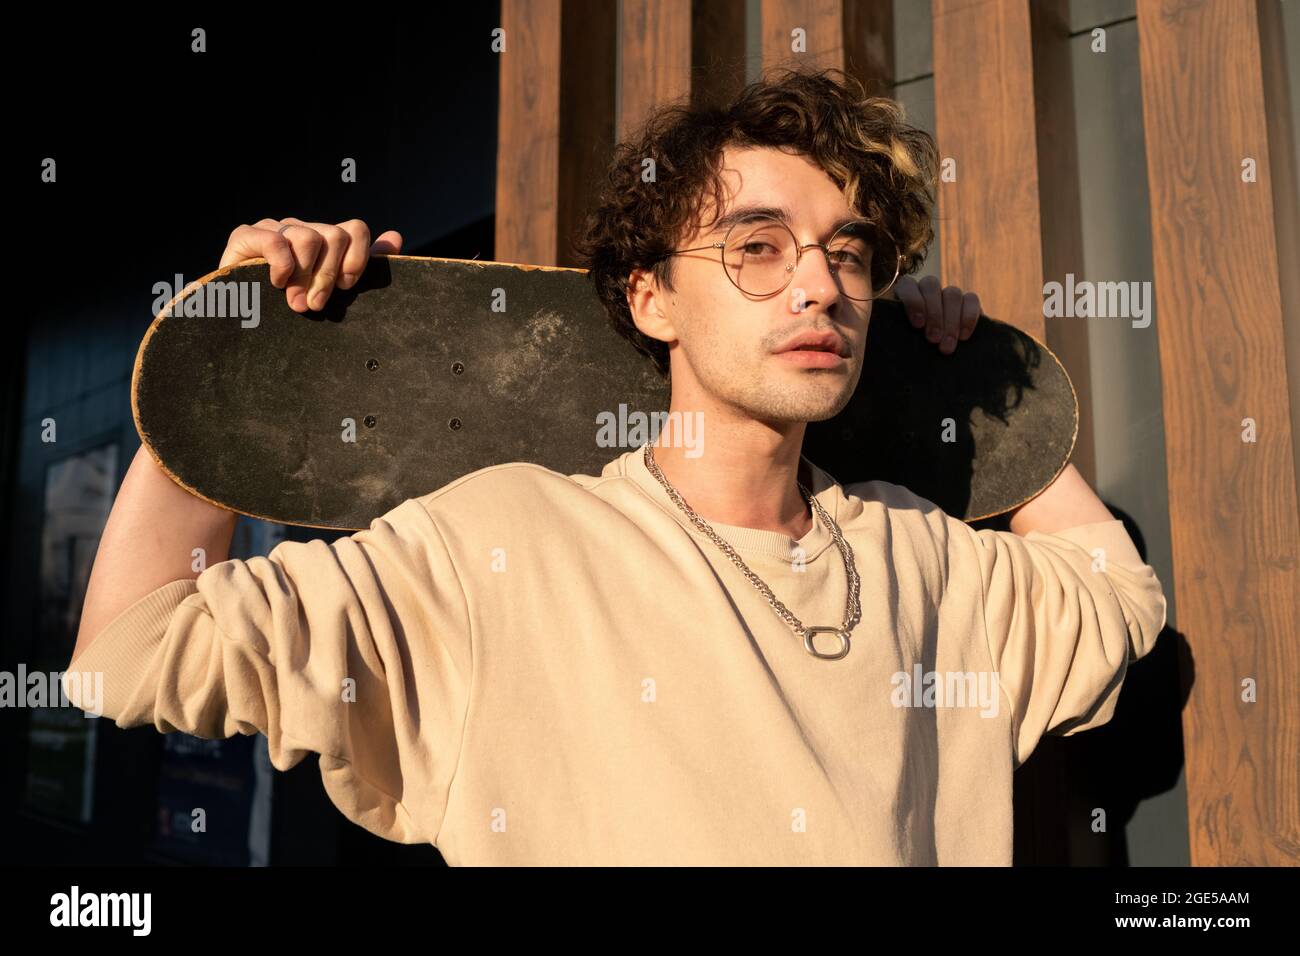 Teenage guy holding skateboard behind his neck while standing by building exterior Stock Photo